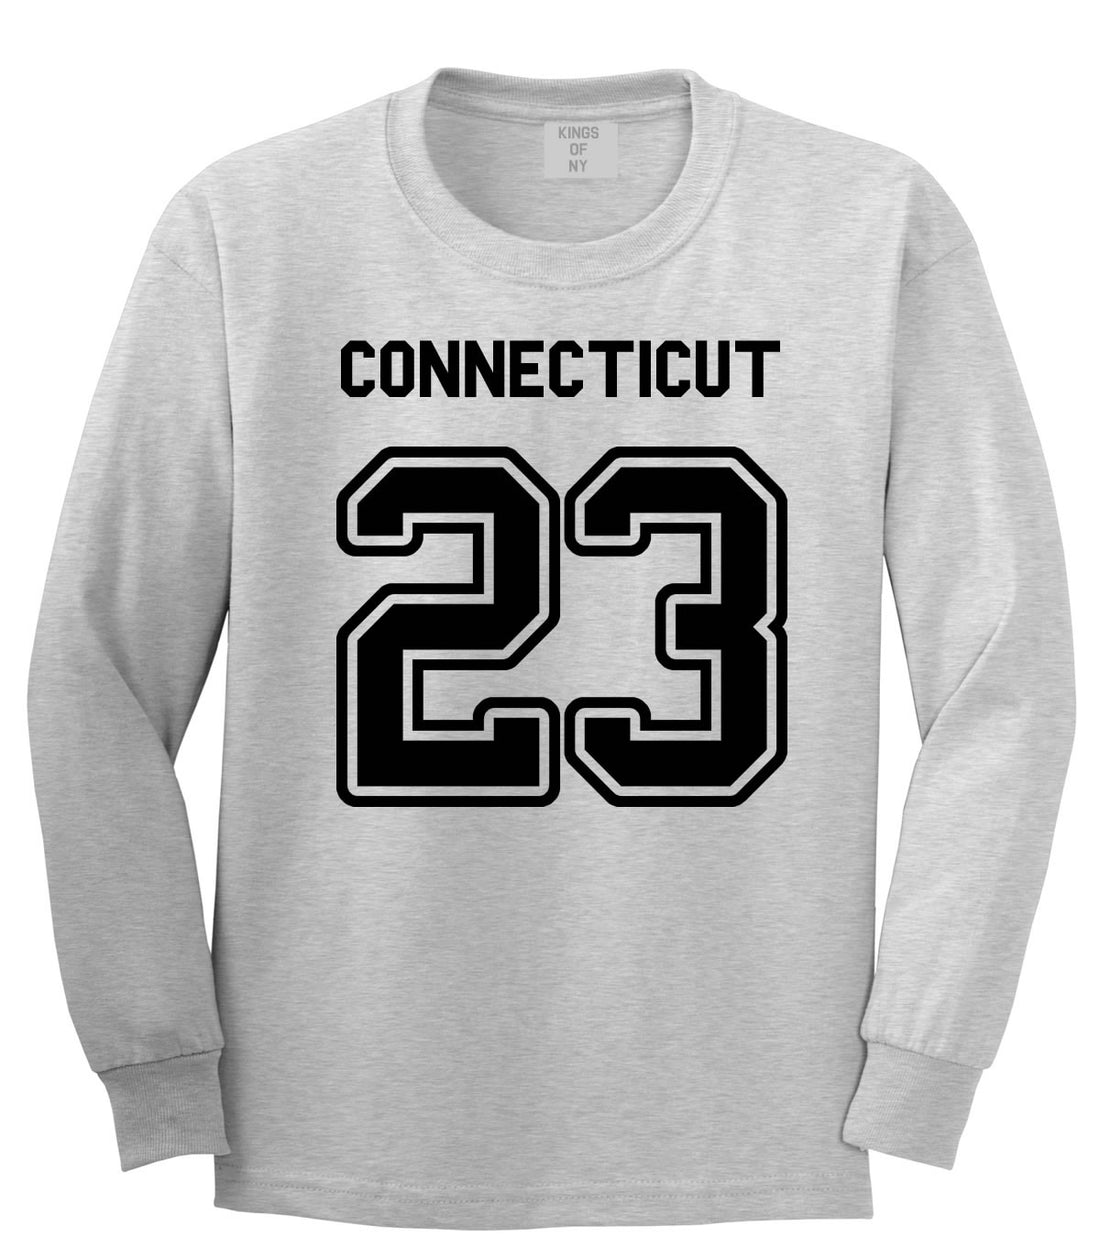 Sport Style Connecticut 23 Team State Jersey Long Sleeve T-Shirt By Kings Of NY